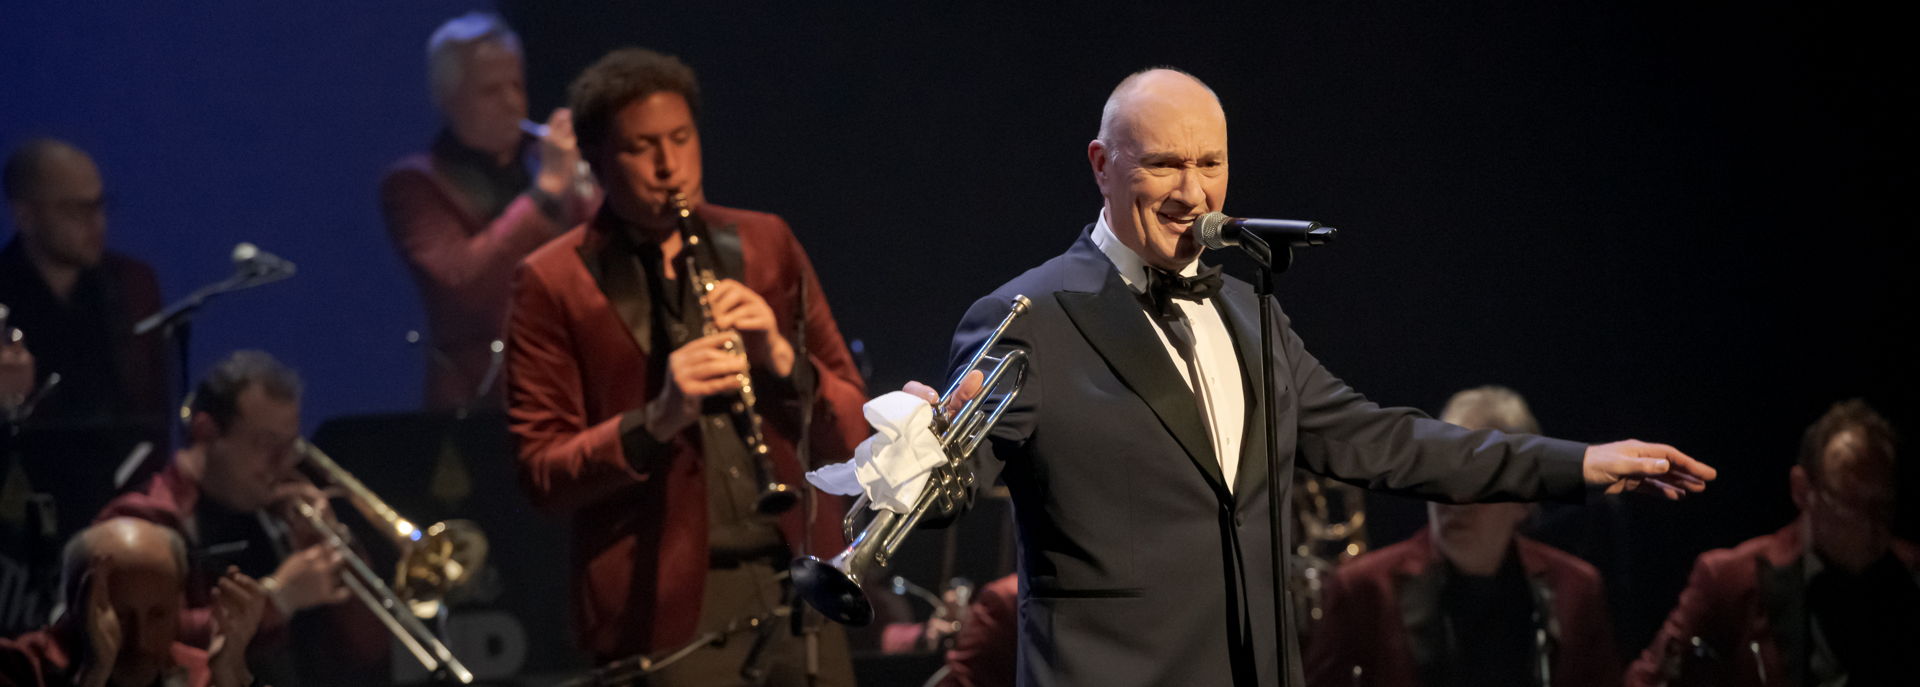 Henk Poort  -Singing with a Big Band - 2022 in De Tamboer